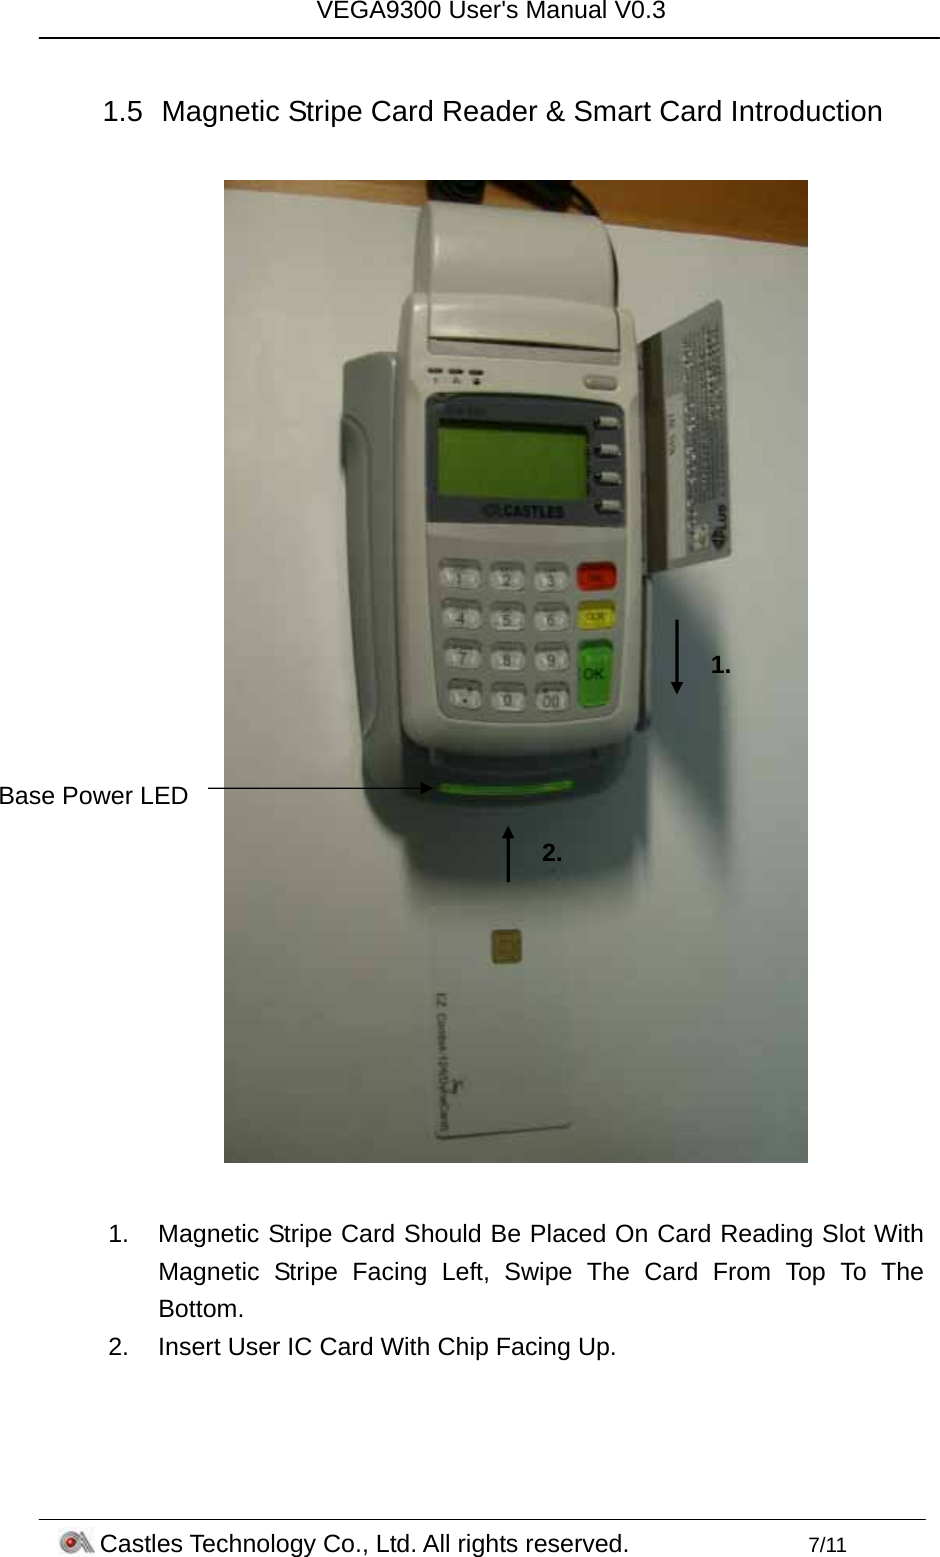 VEGA9300 User&apos;s Manual V0.3 Castles Technology Co., Ltd. All rights reserved.        7/11  1.5  Magnetic Stripe Card Reader &amp; Smart Card Introduction    1.  Magnetic Stripe Card Should Be Placed On Card Reading Slot With Magnetic Stripe Facing Left, Swipe The Card From Top To The Bottom. 2.  Insert User IC Card With Chip Facing Up. Base Power LED 1. 2. 